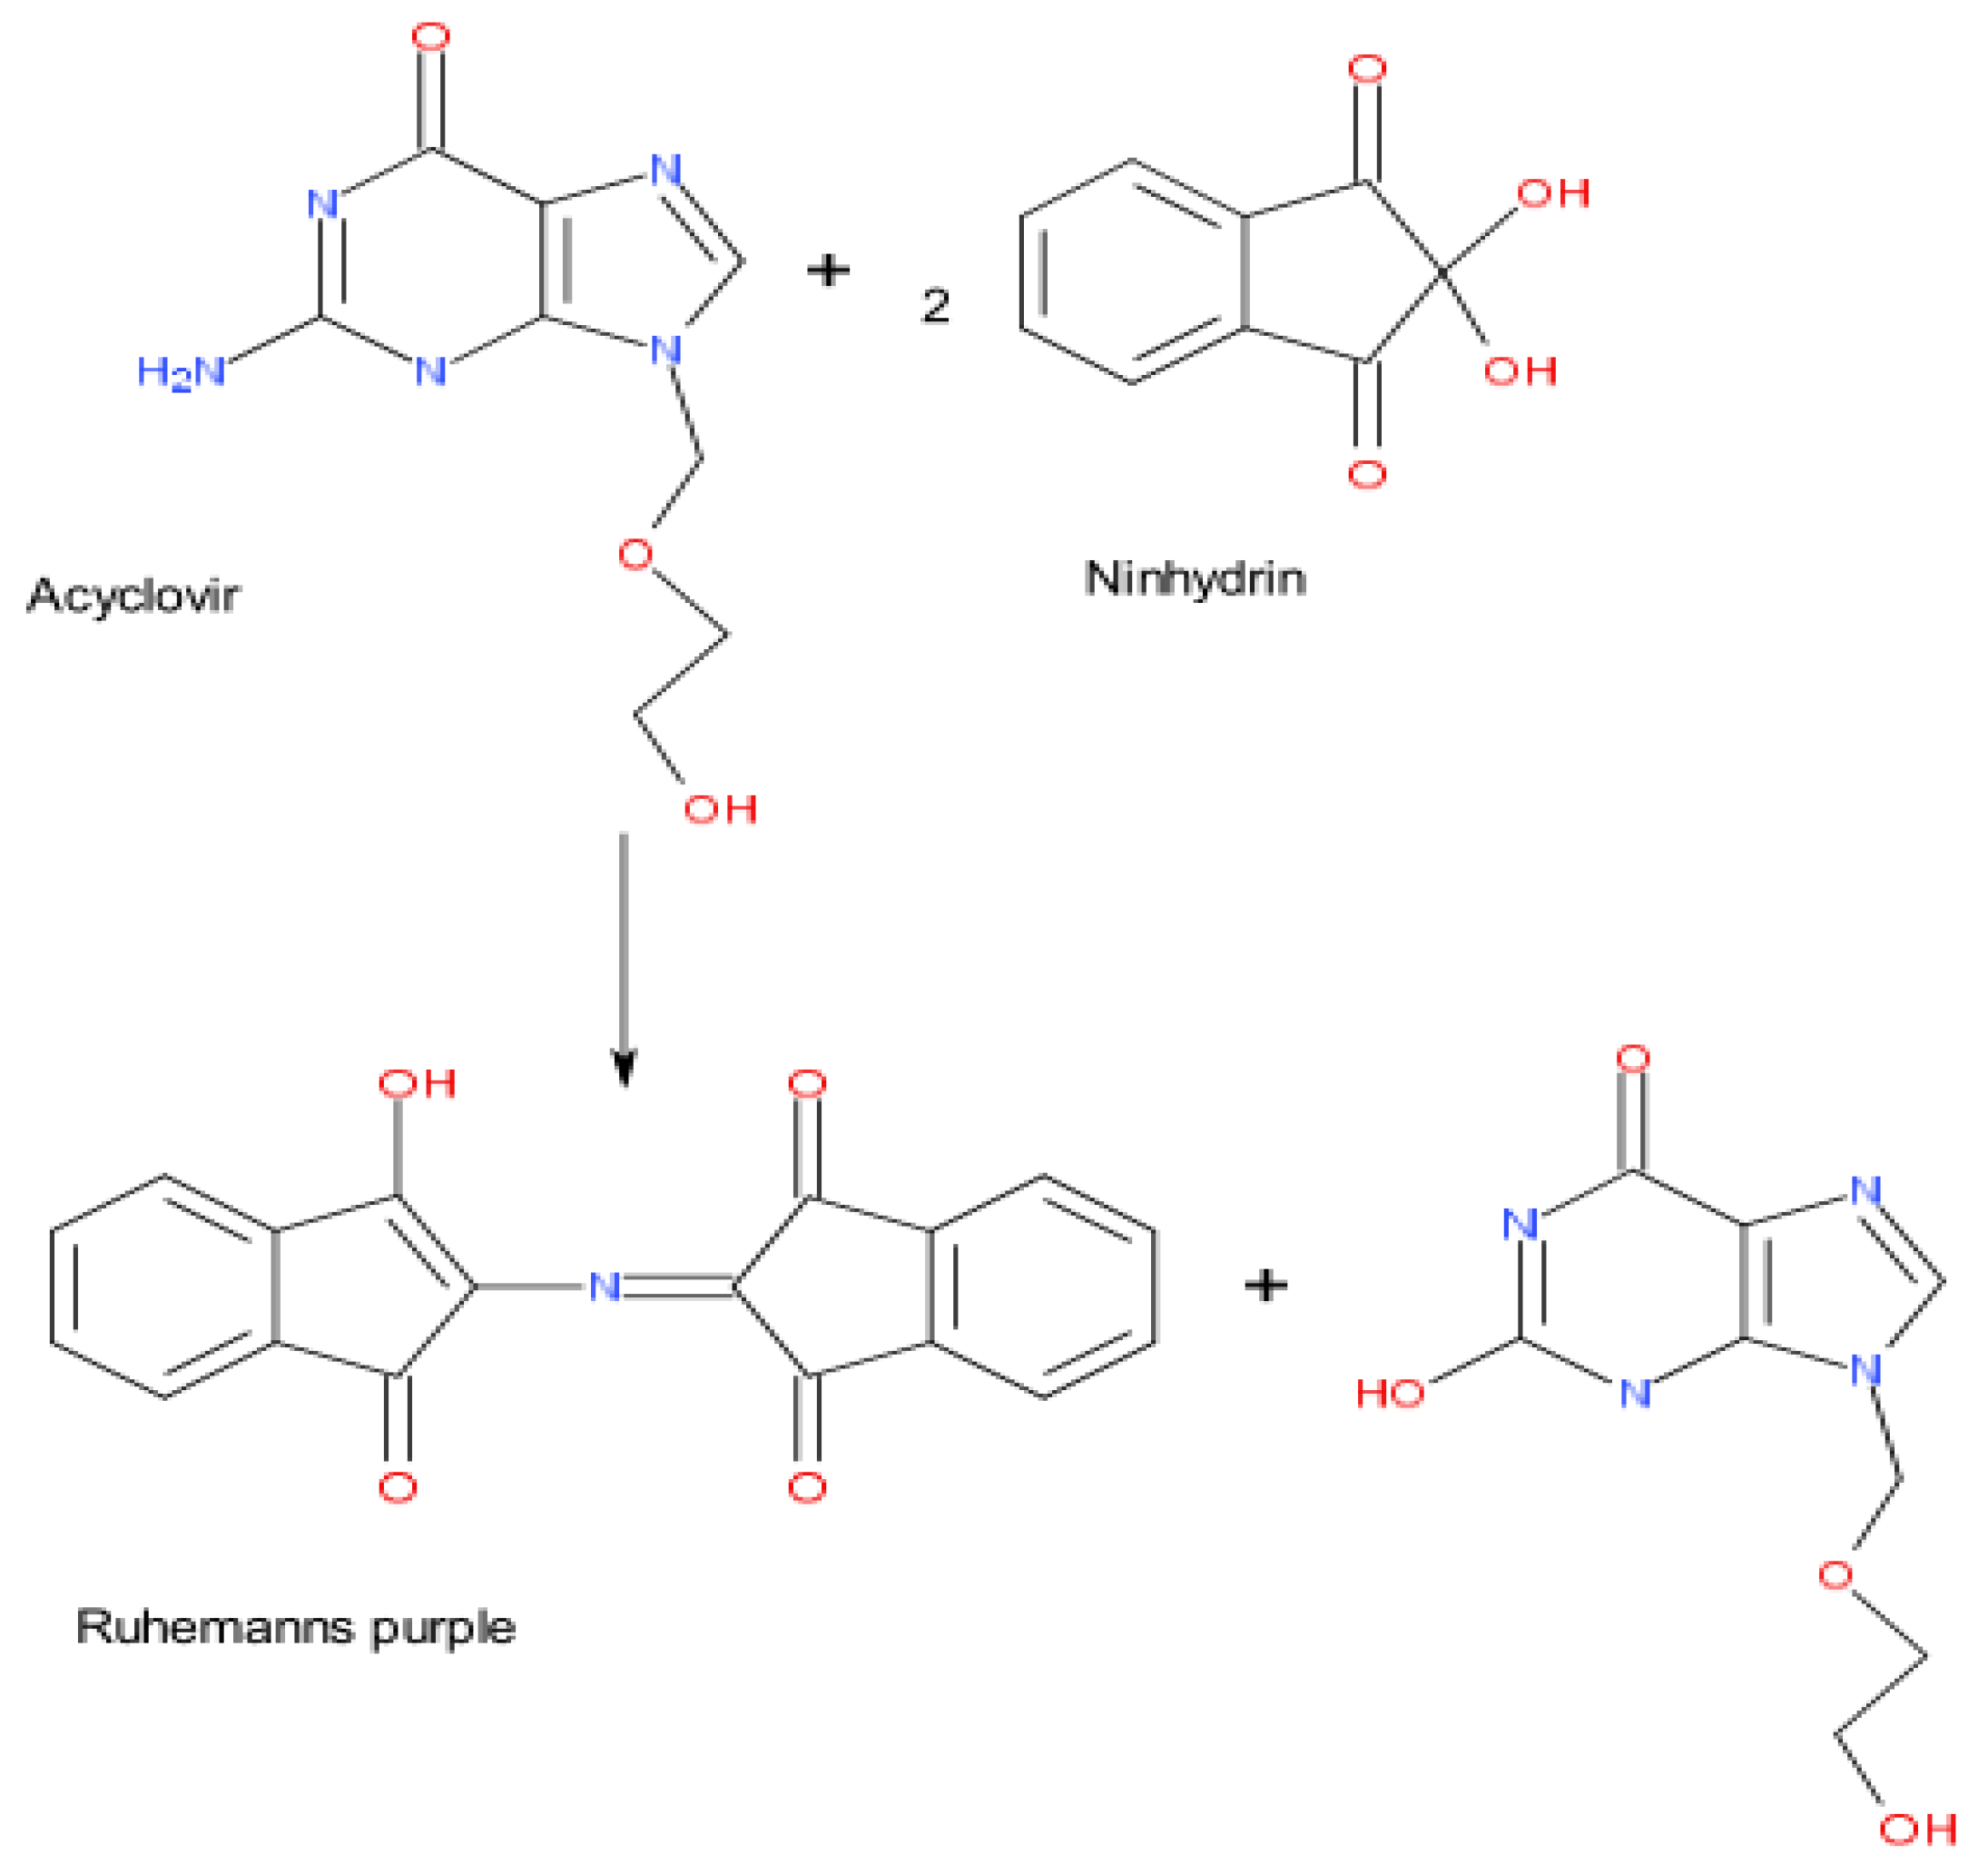 critical review of synthesis toxicology and detection of acyclovir